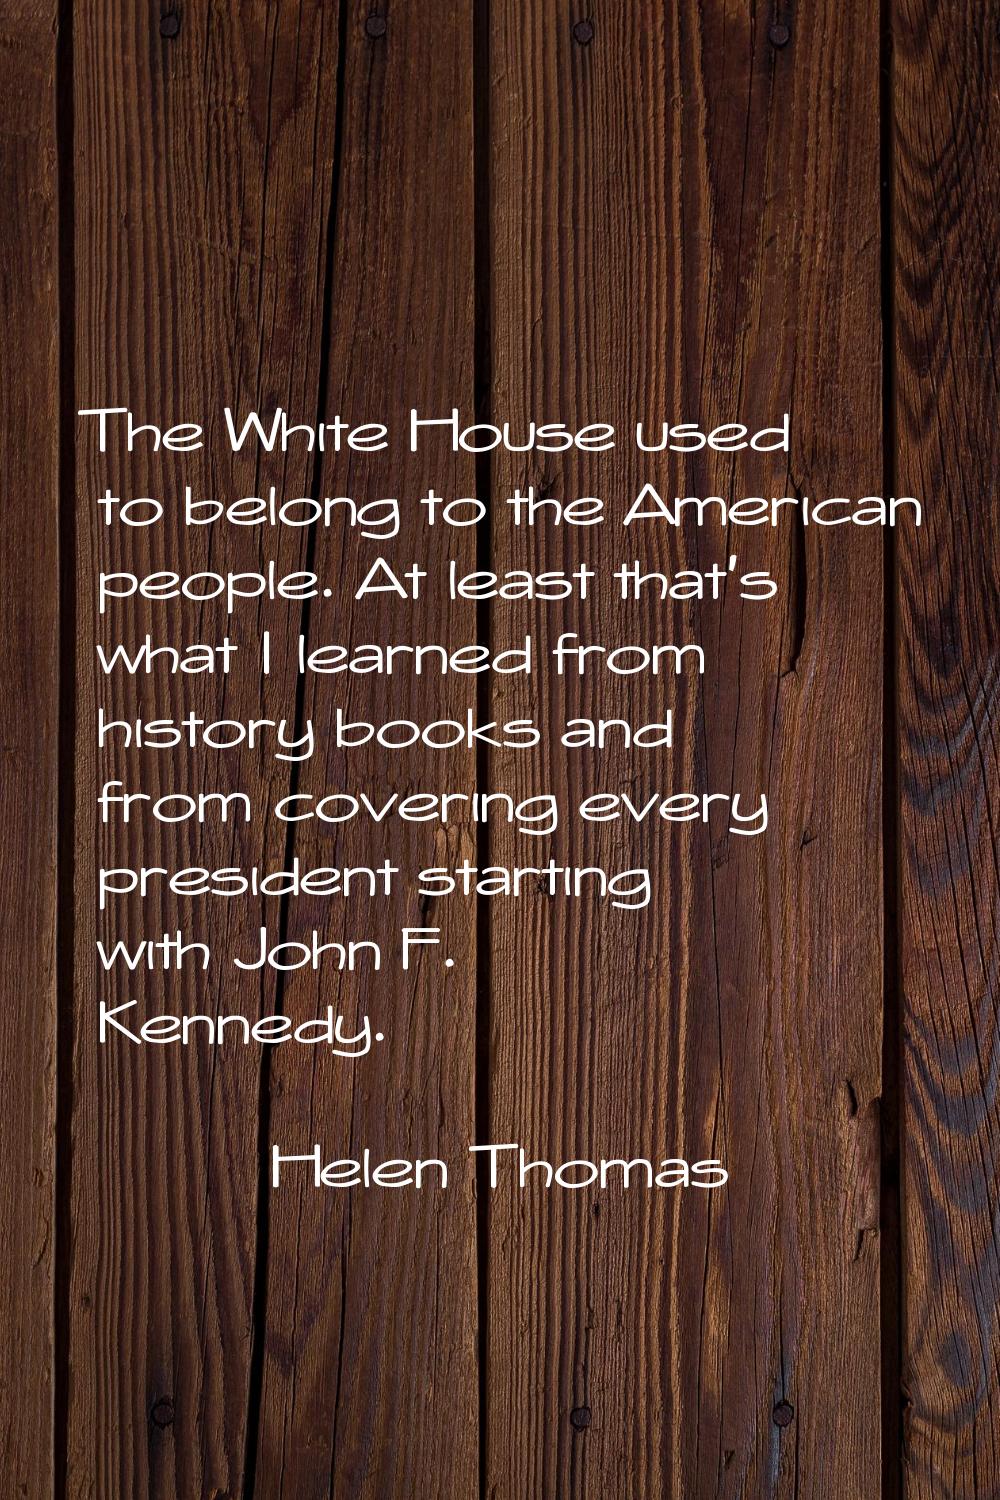 The White House used to belong to the American people. At least that's what I learned from history 